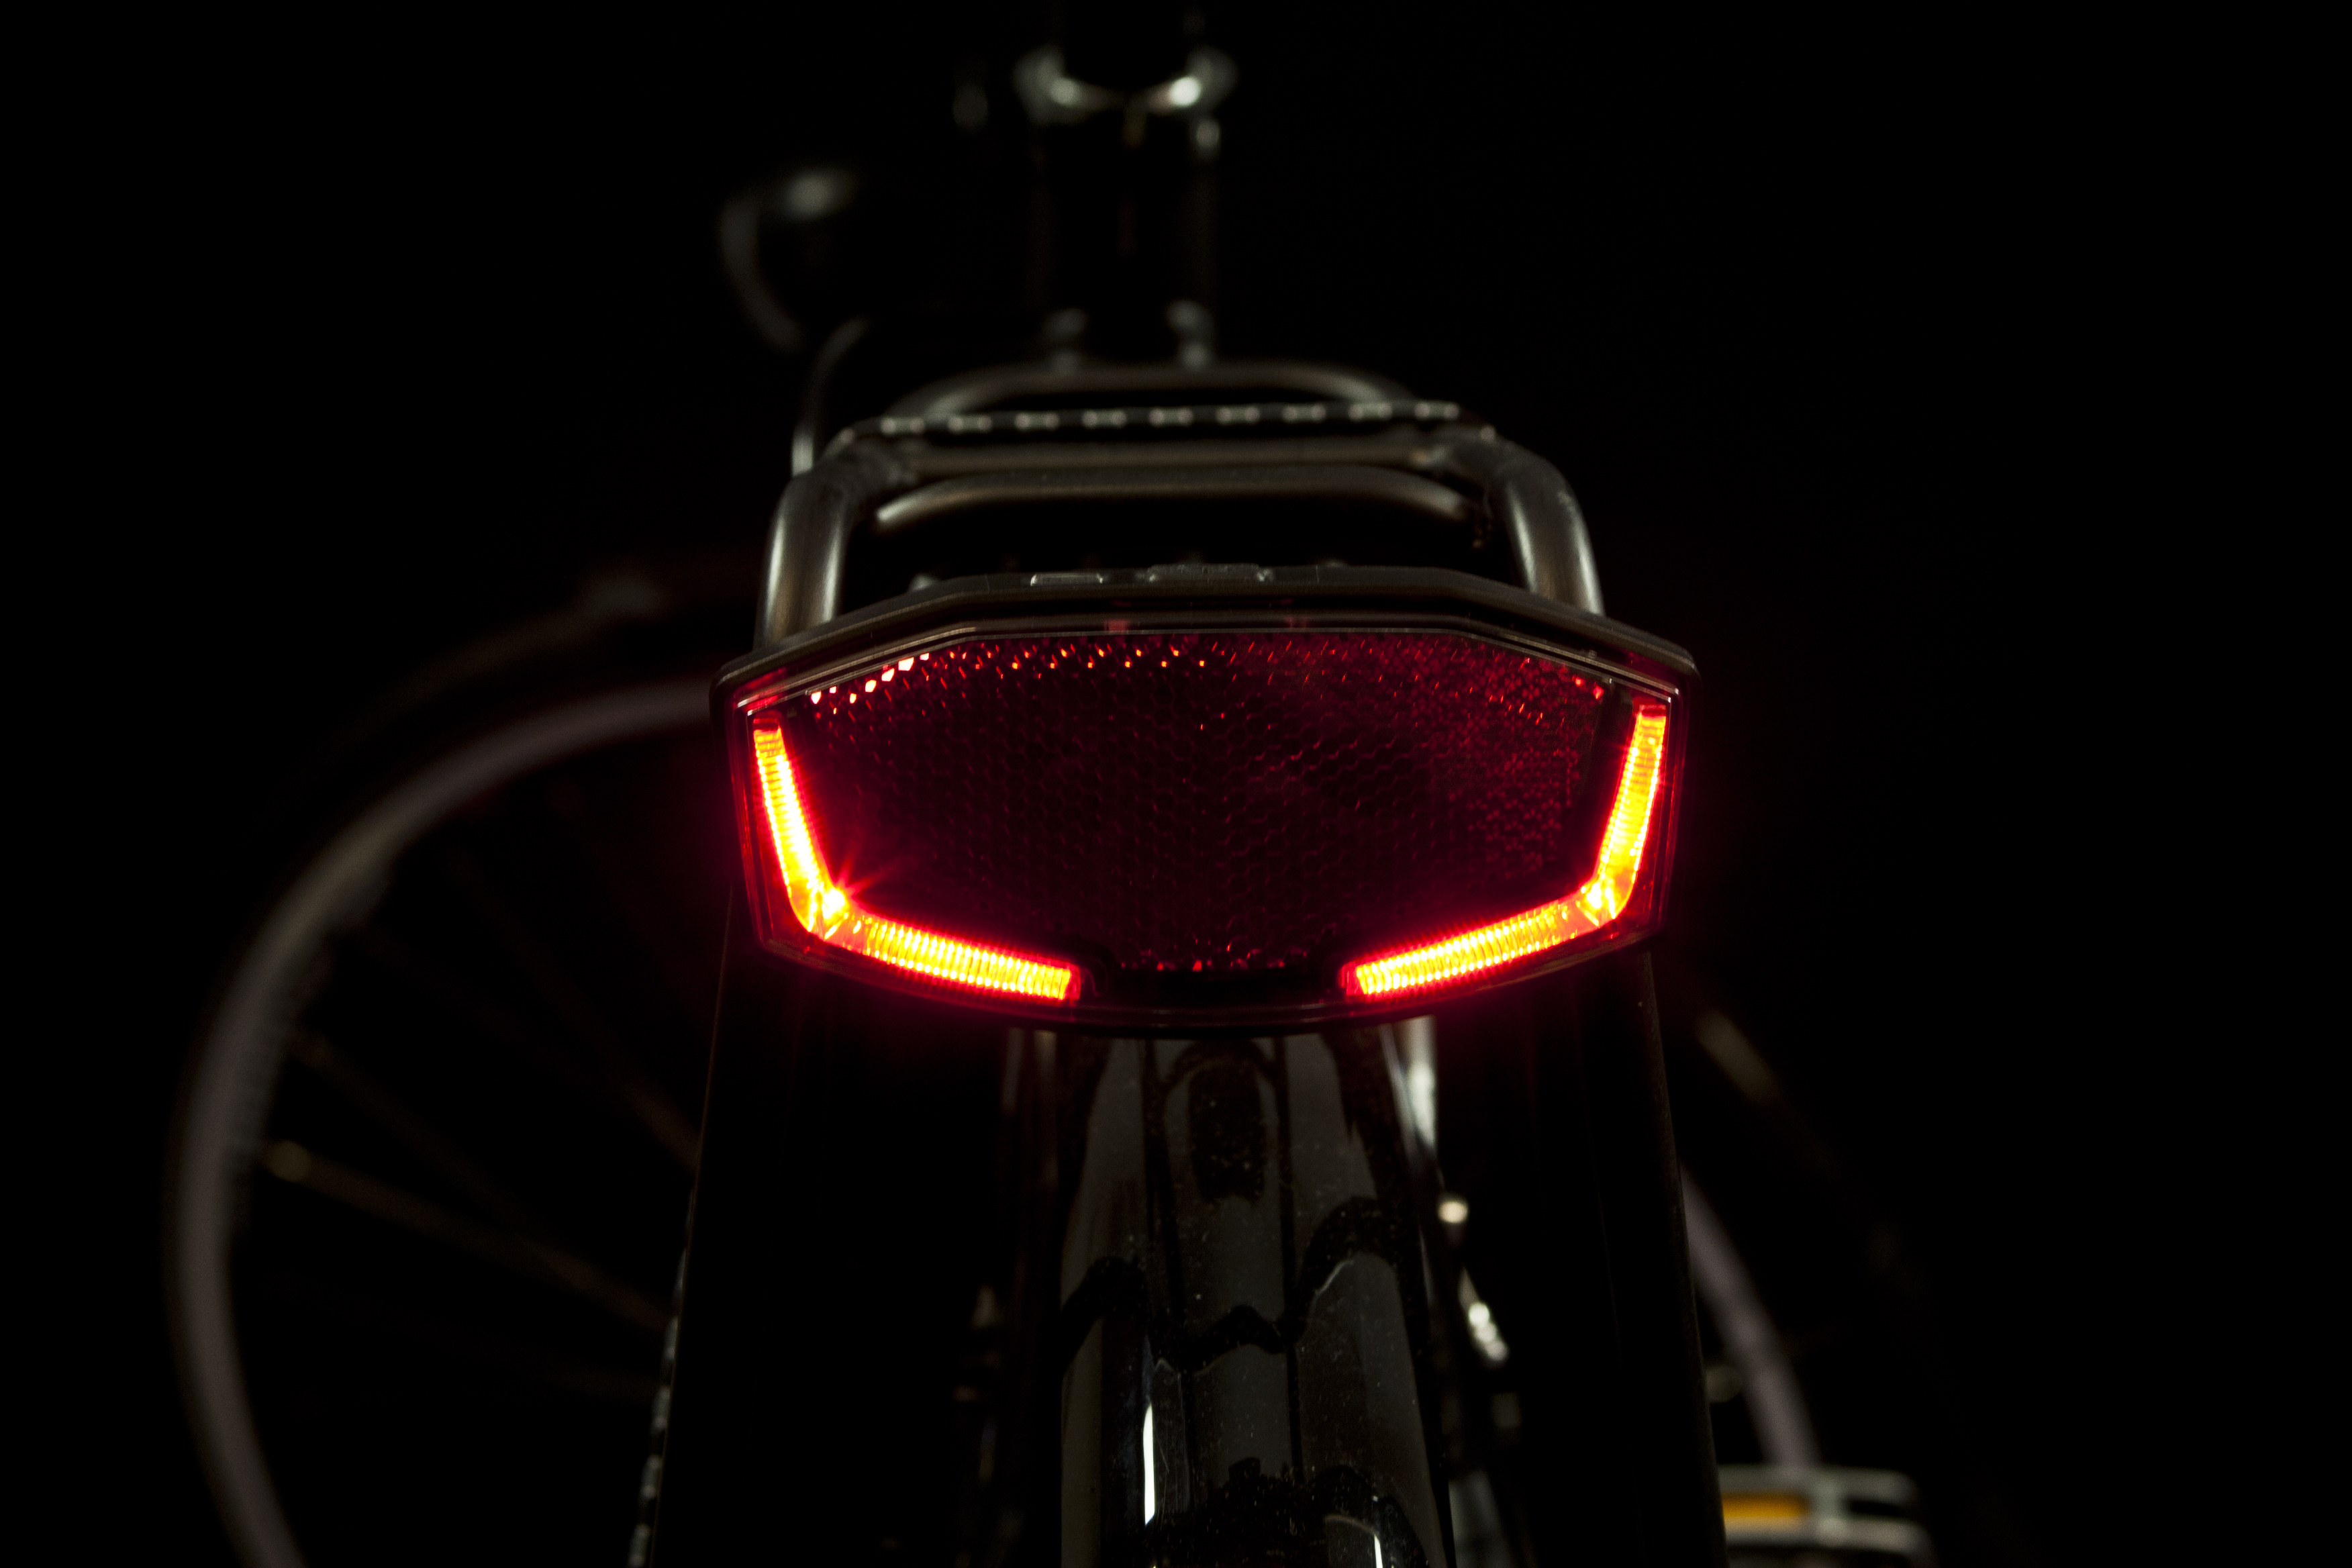 Lineo rearlight on carrier